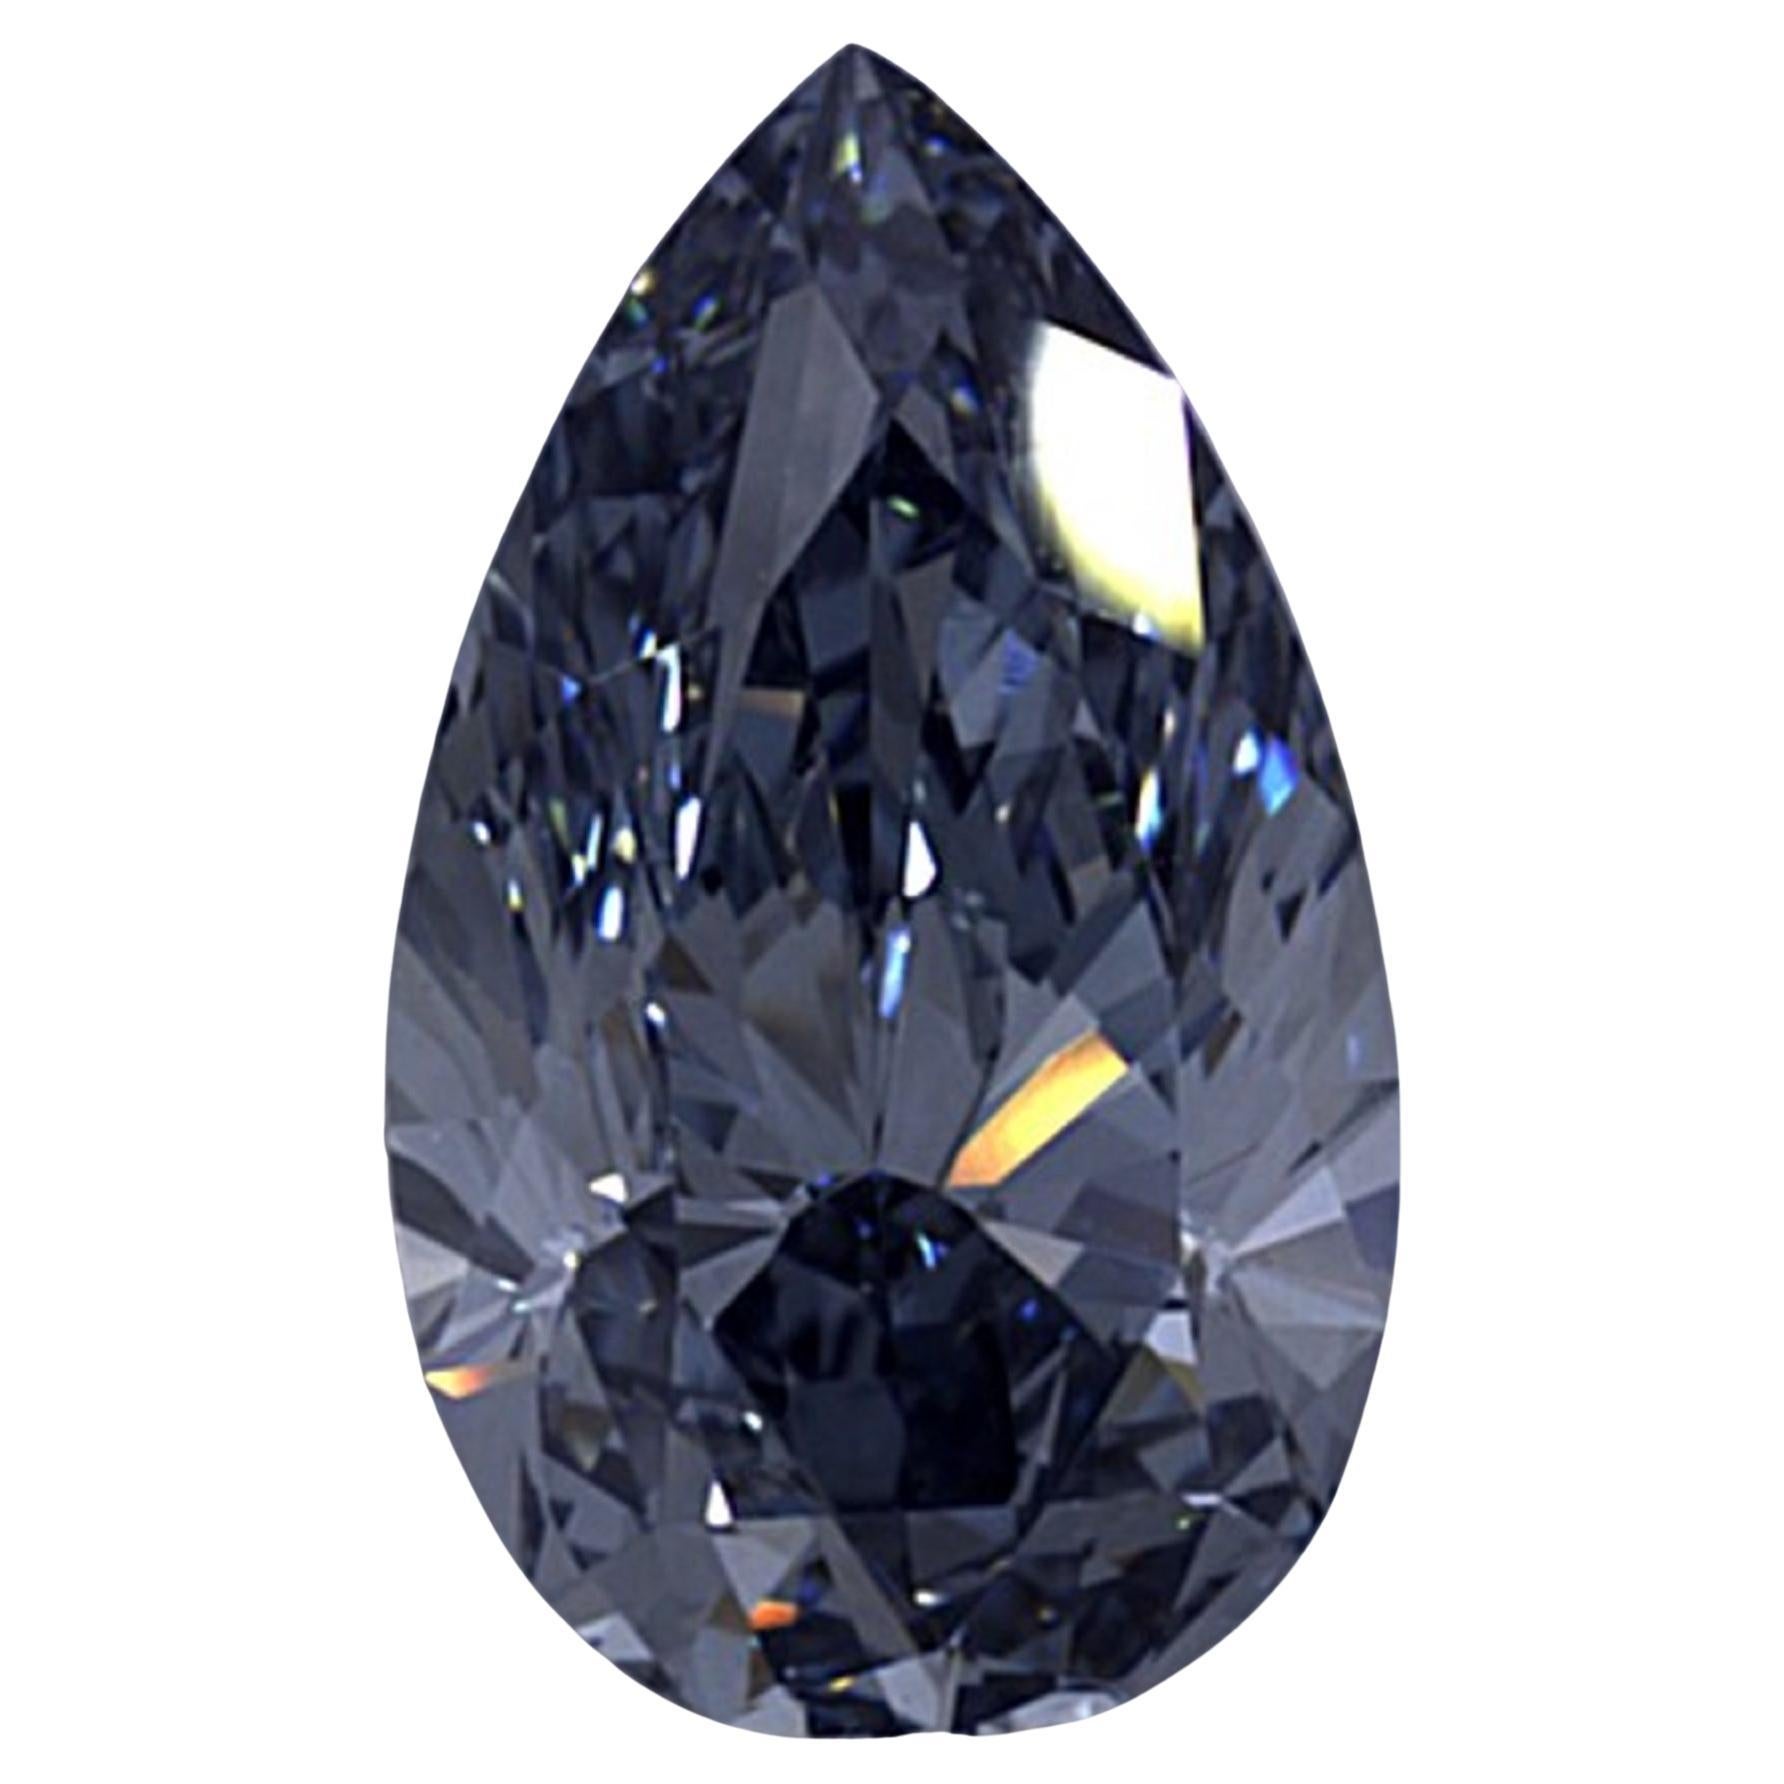 Behold the extraordinary brilliance of our Exceptional GIA Certified 1 Carat Fancy Intense Blue Diamond, a true marvel of nature's rarest treasures. Certified by GIA for its impeccable quality and authenticity, this mesmerizing gem boasts a